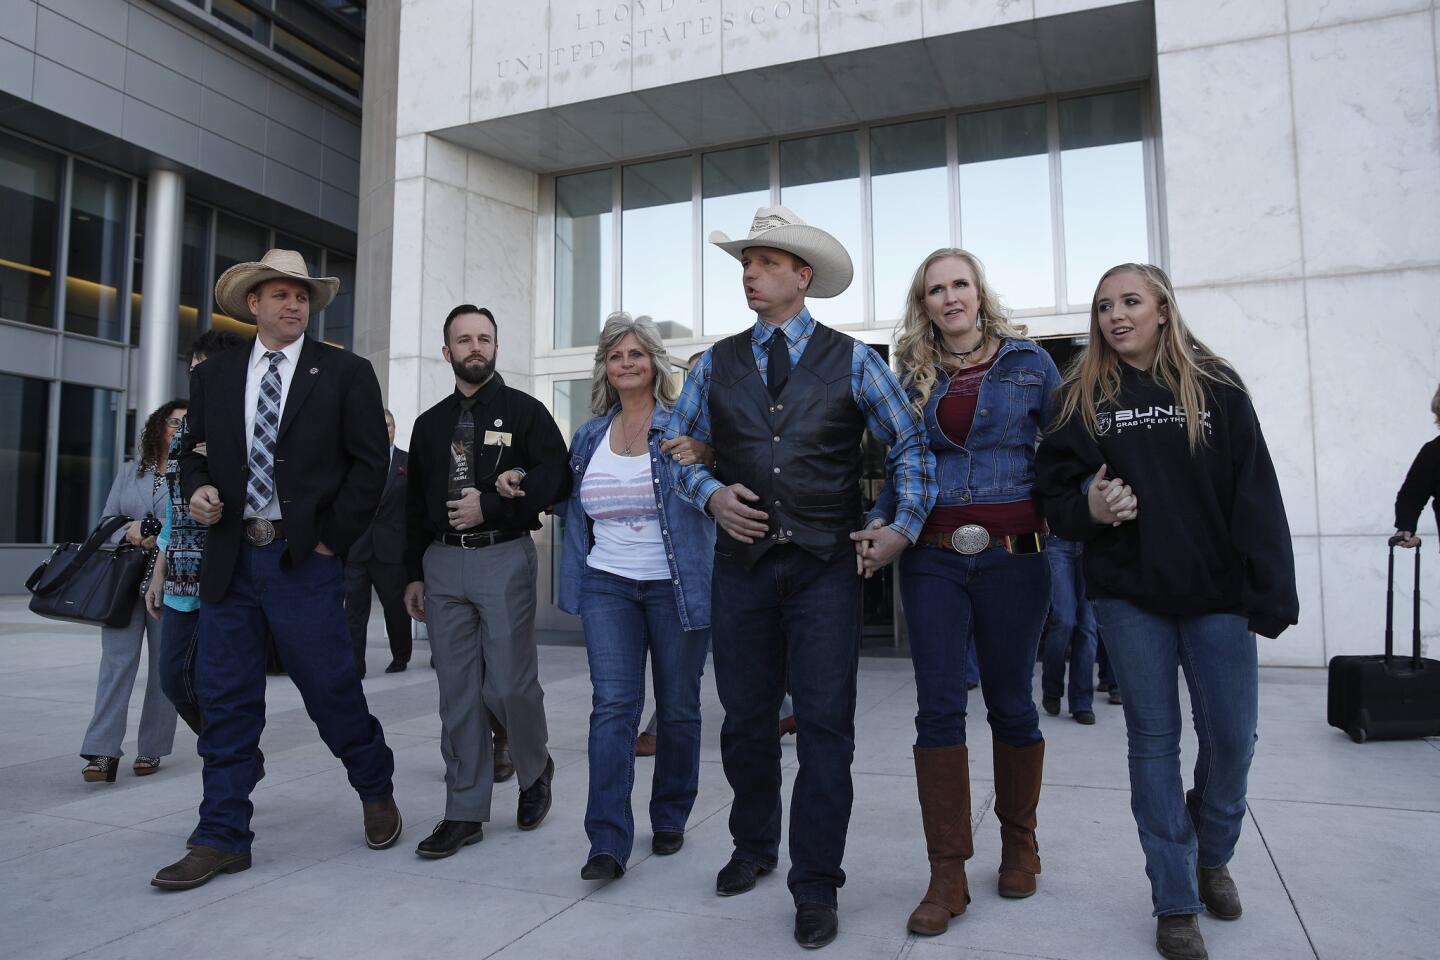 Mistrial declared in Nevada rancher's standoff with federal government